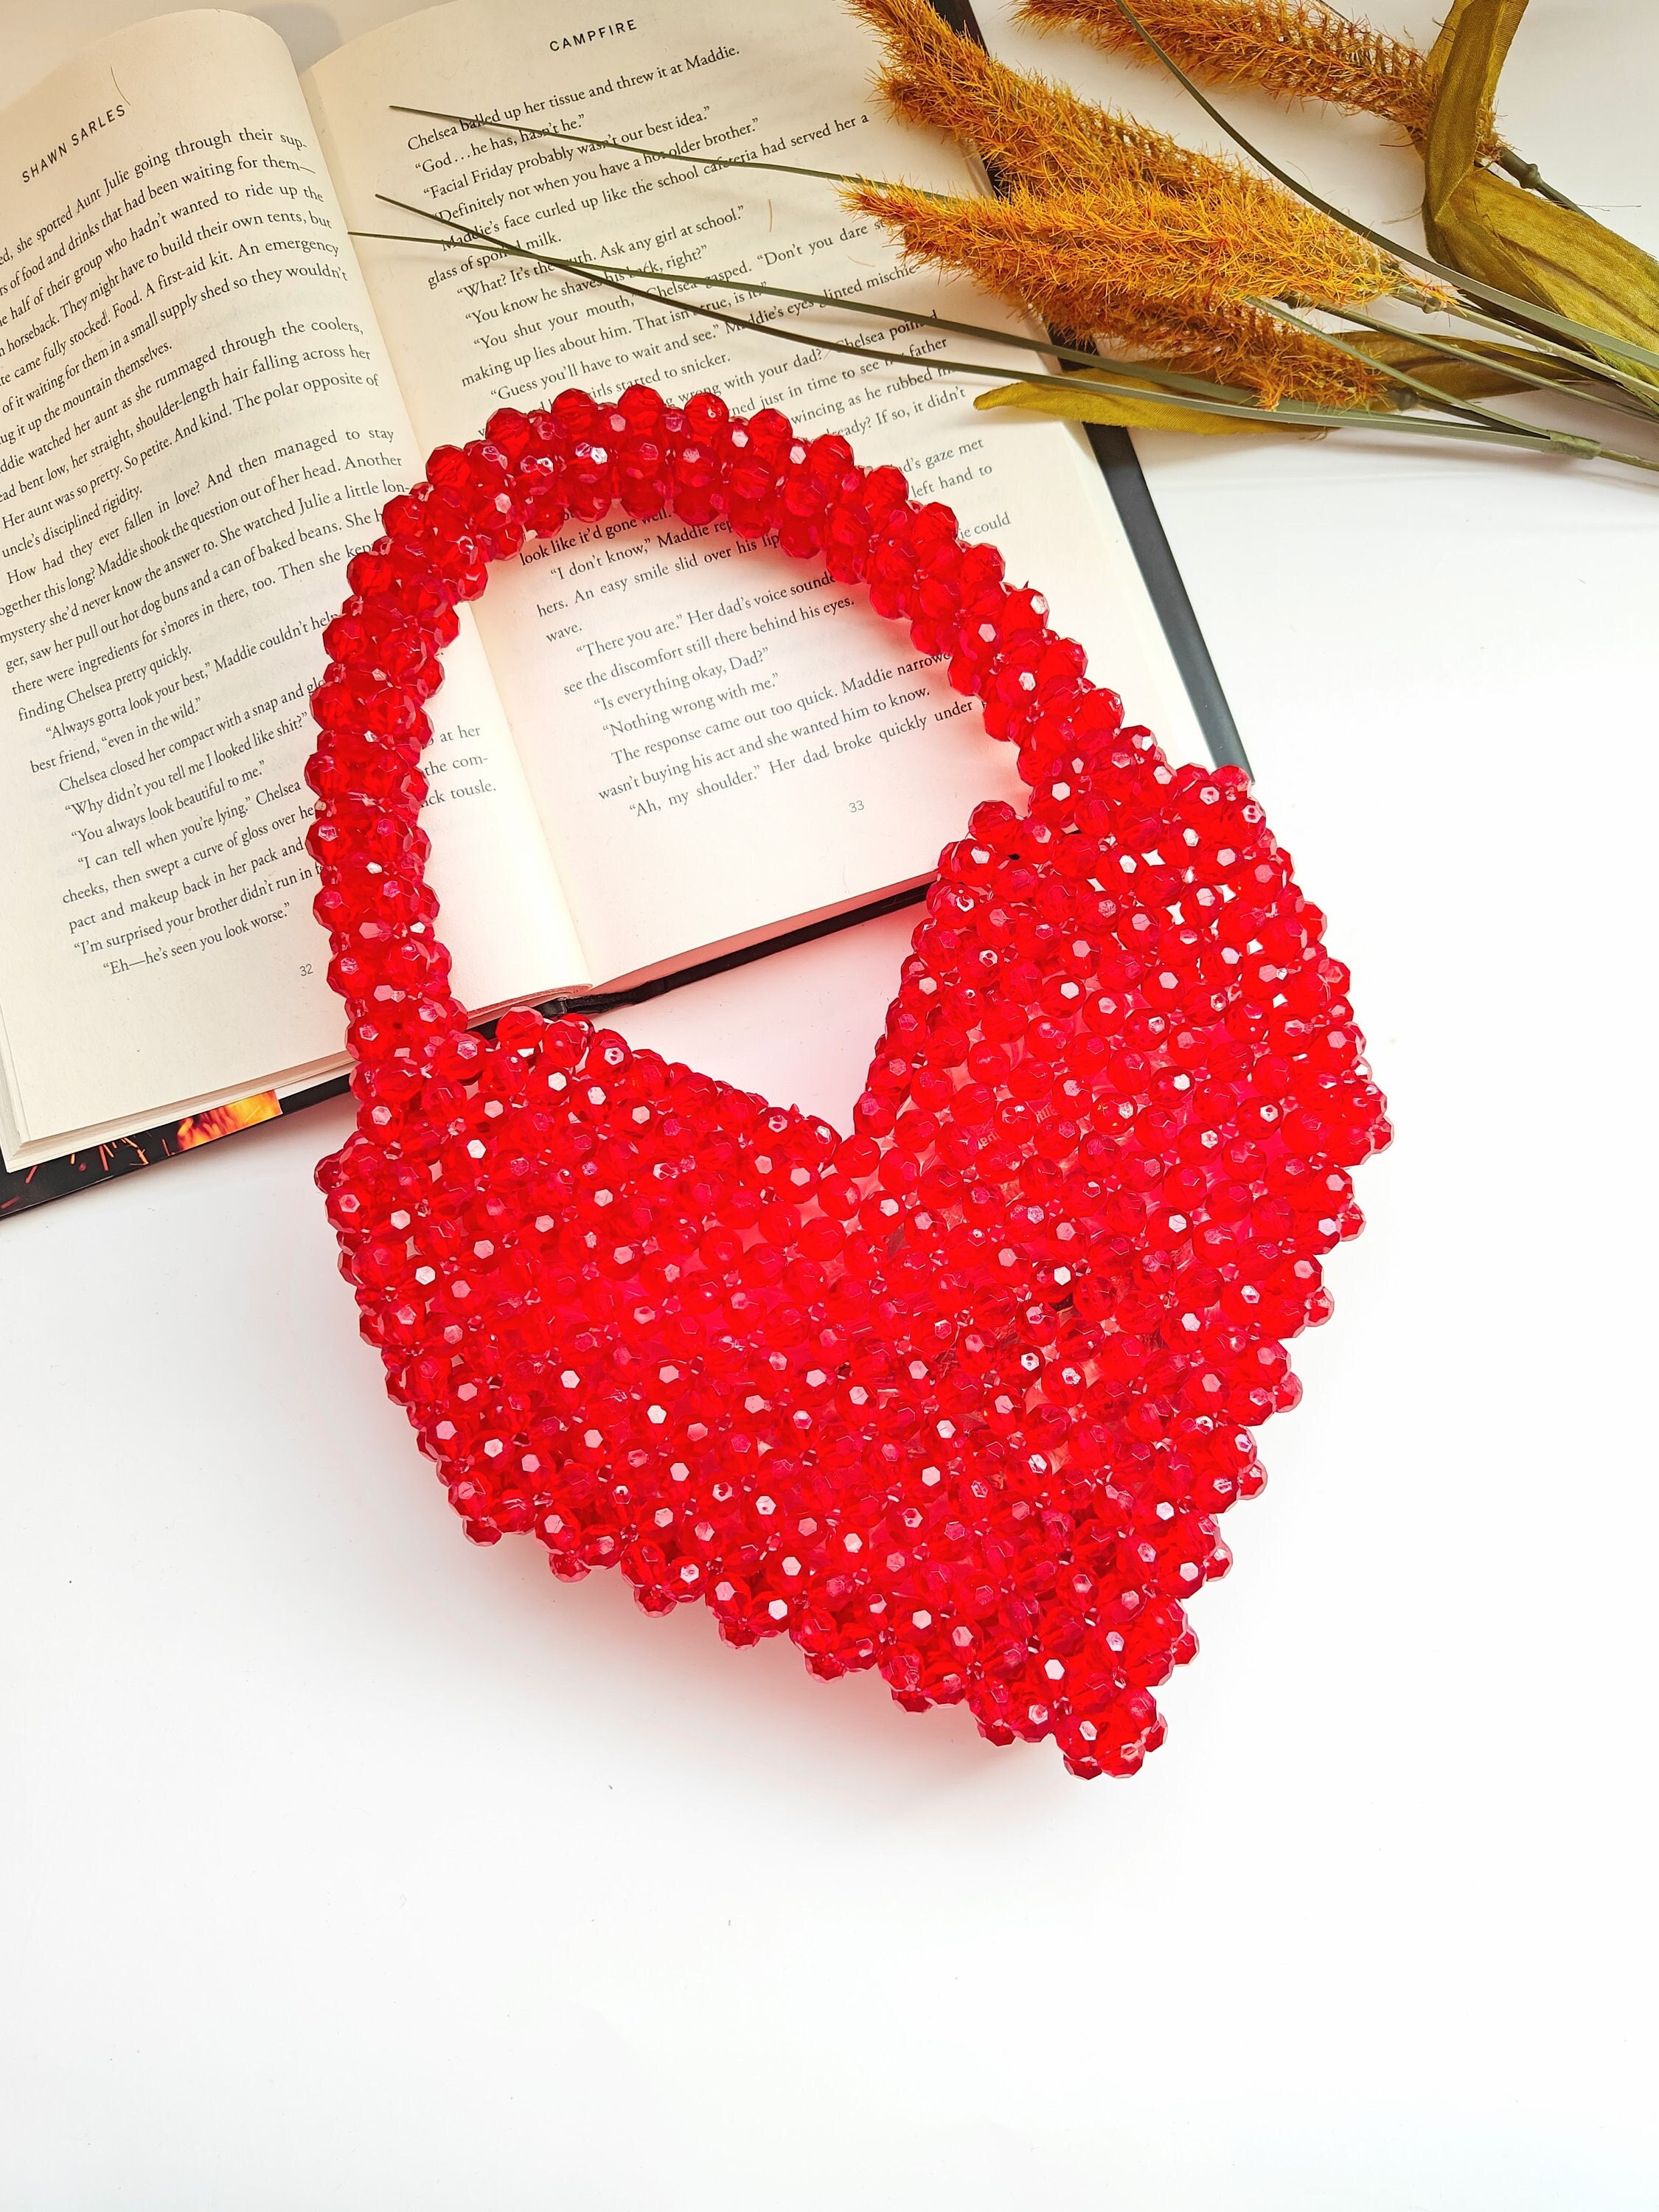 Red Heart Glass Crystal Beads, Glass Heart Beads, Valentines Day